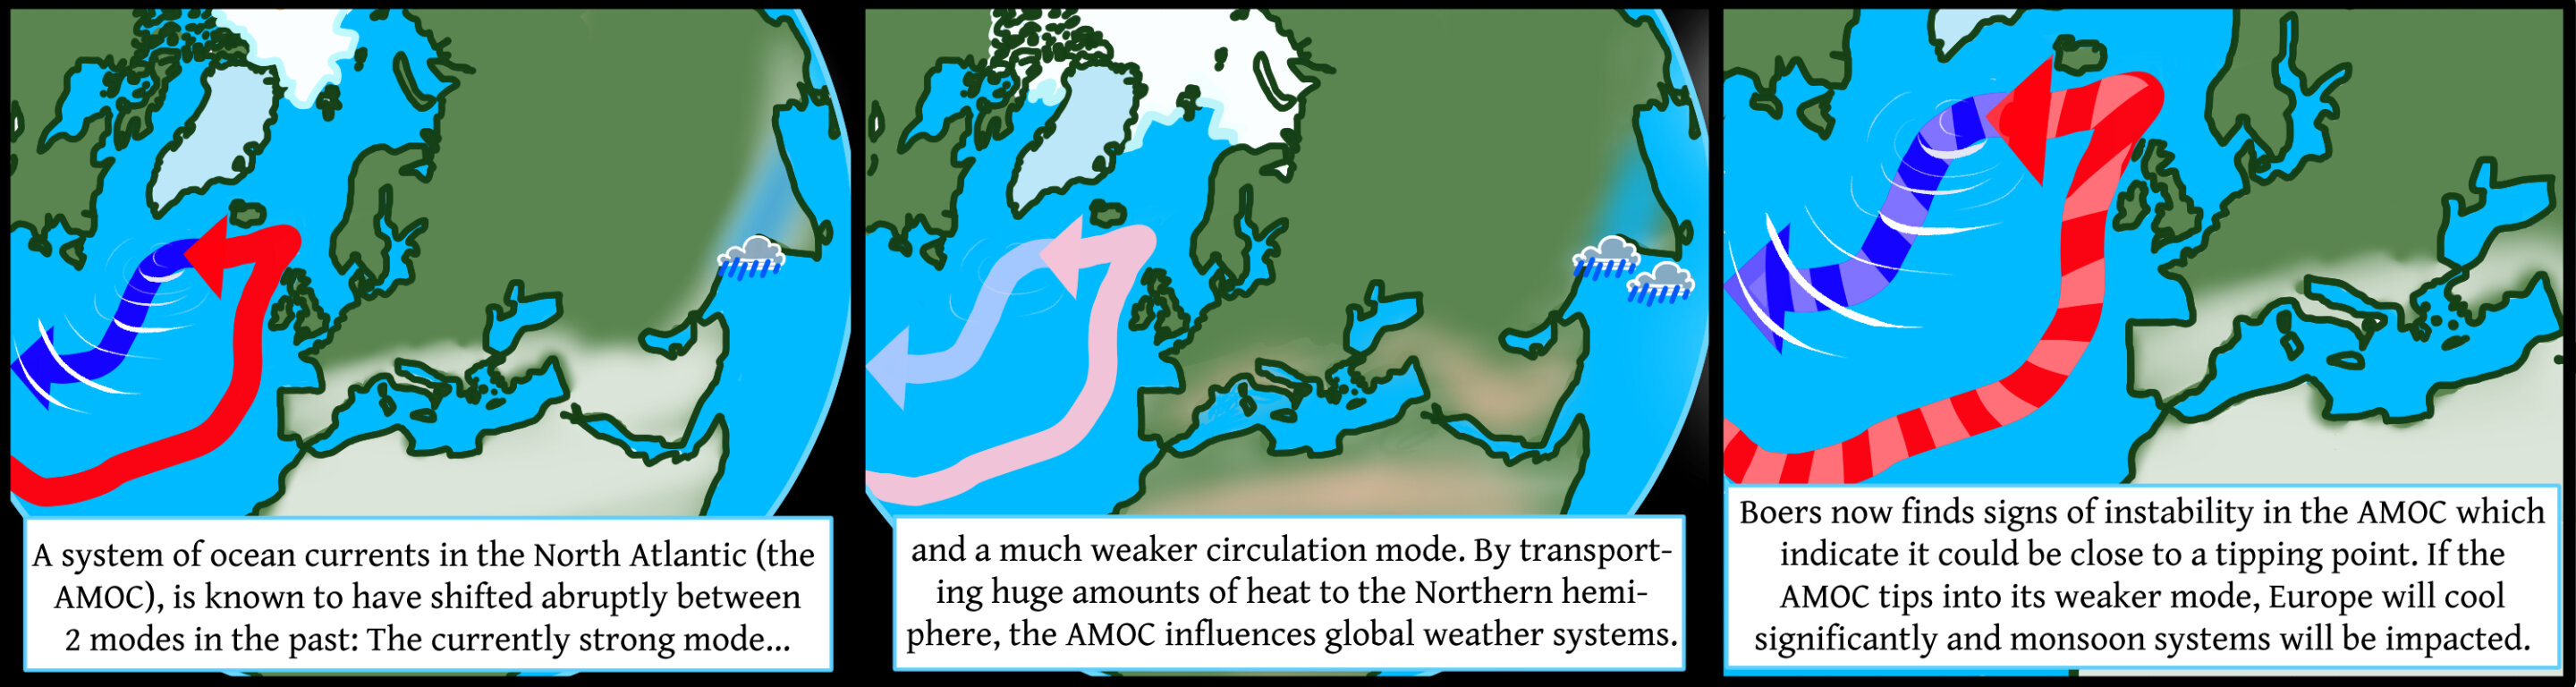 Ocean current system seems to be approaching a tipping point